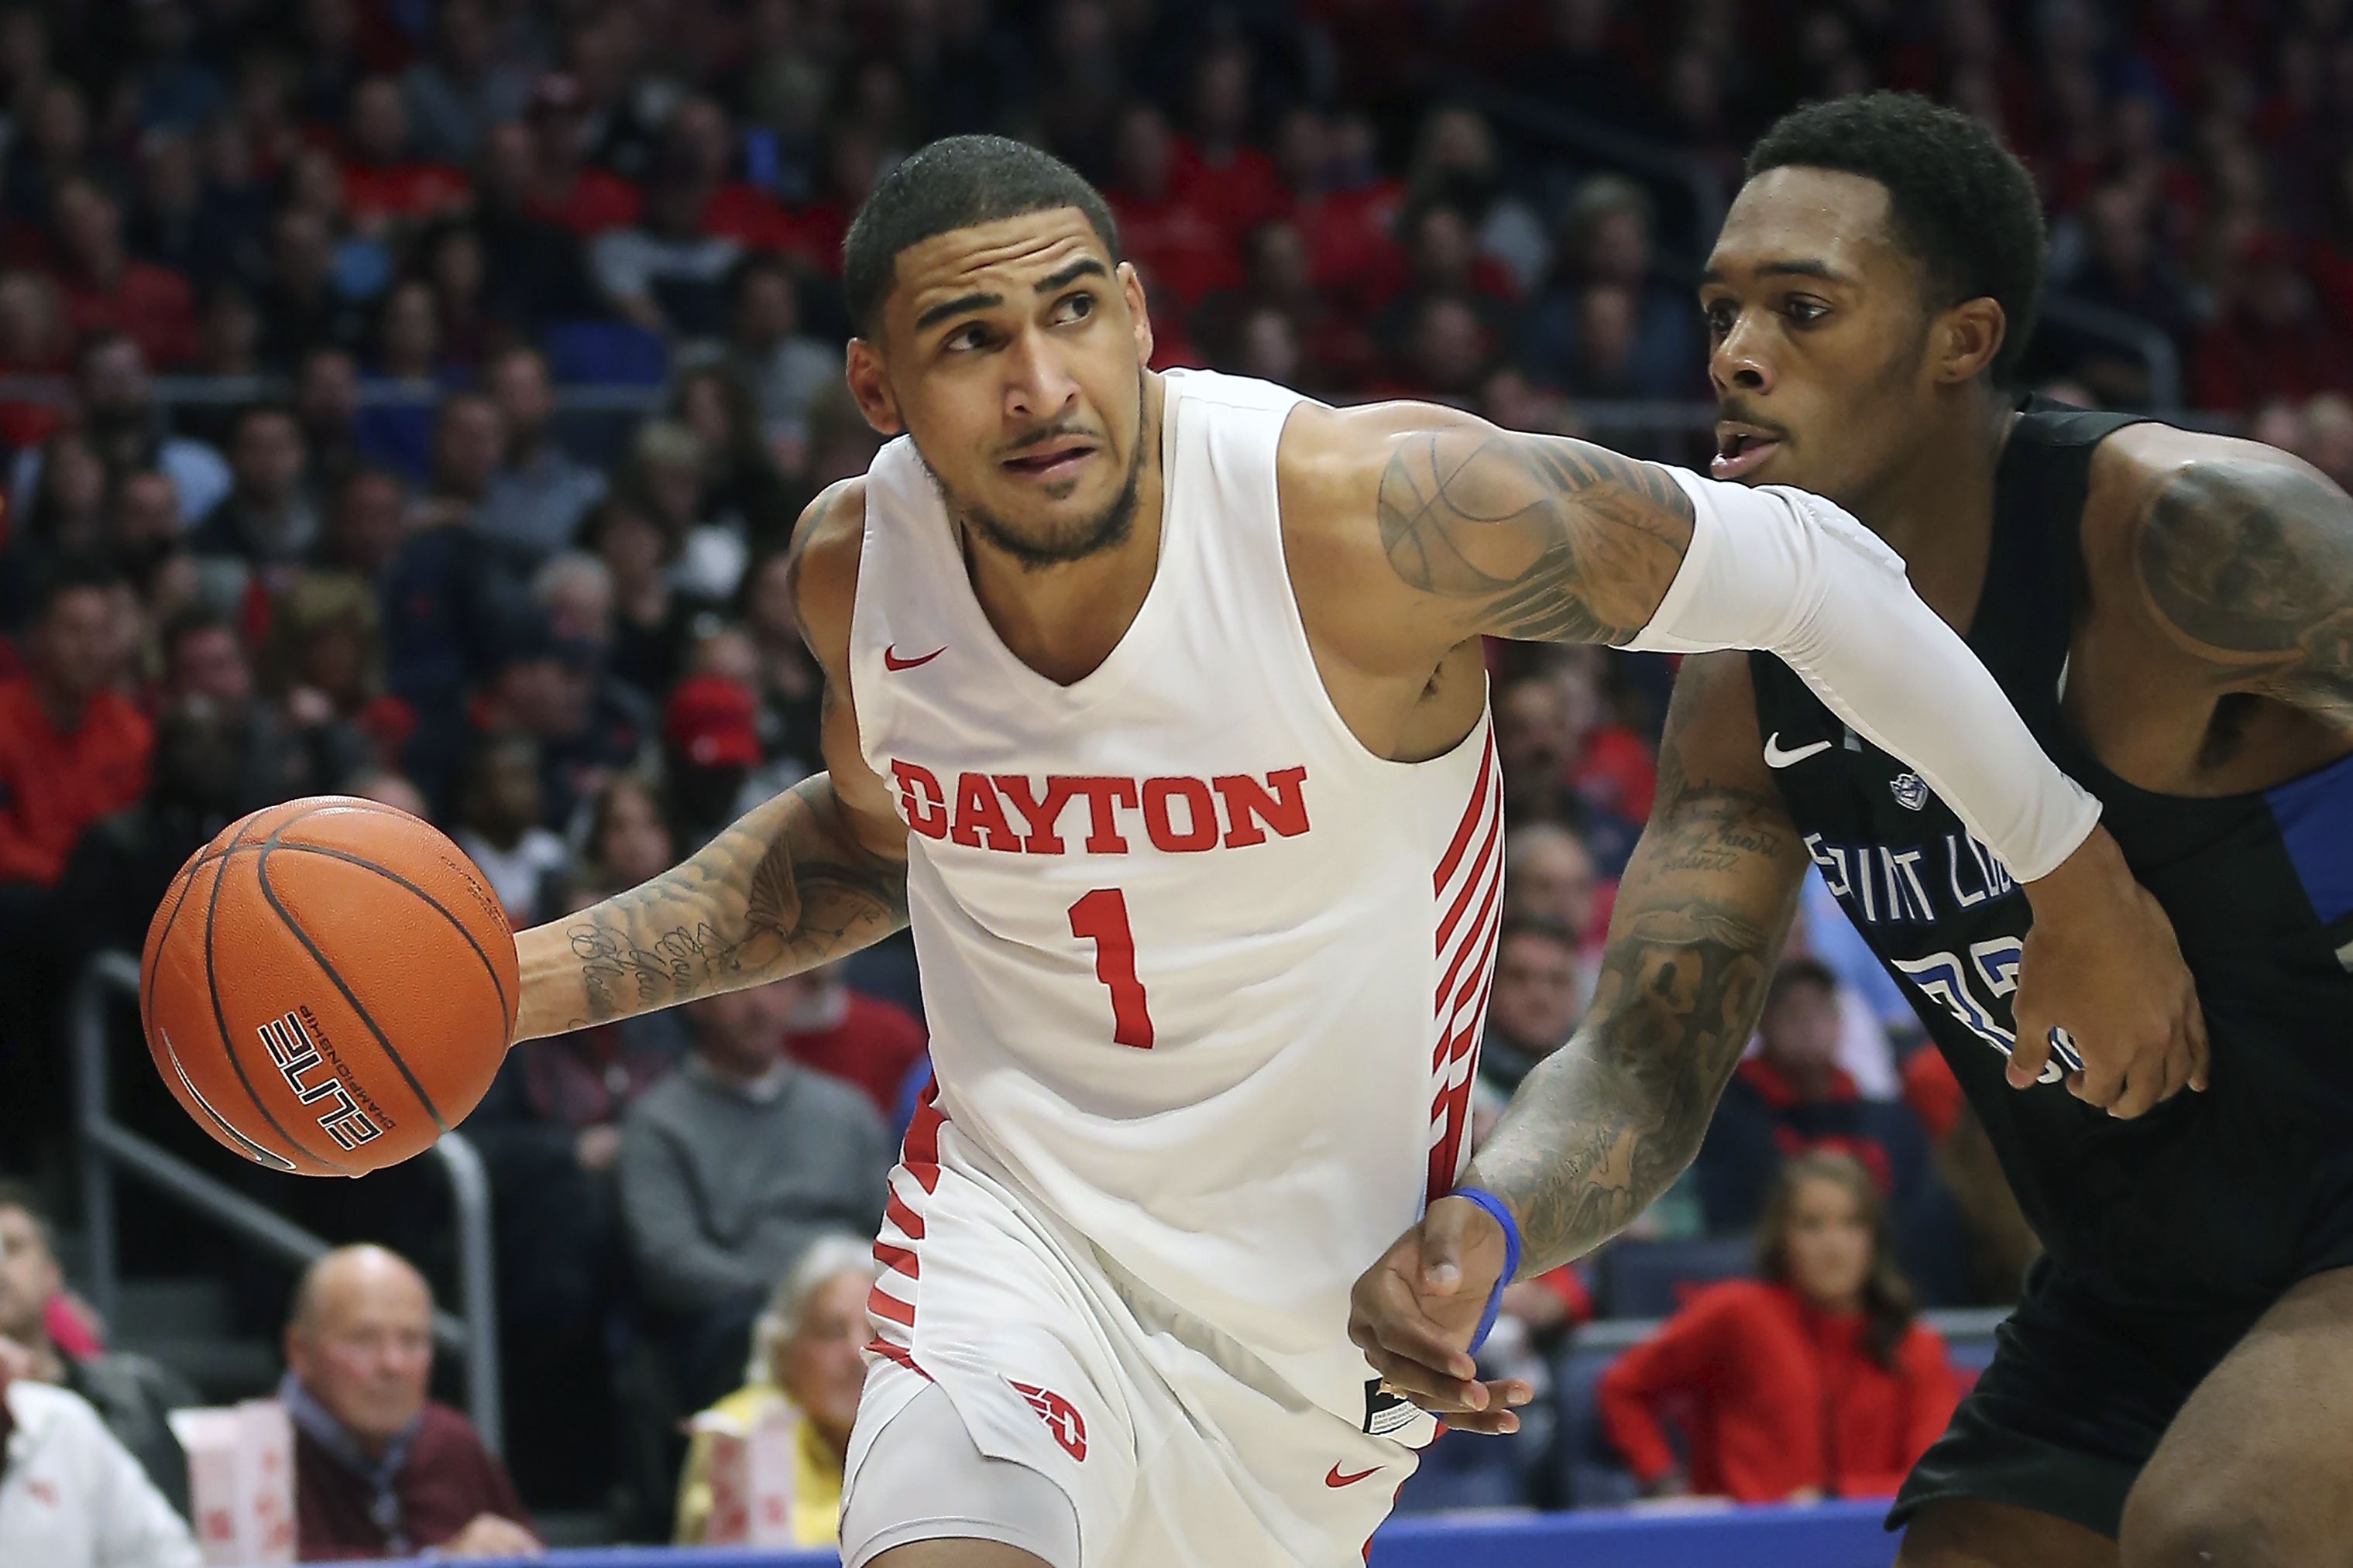 Thomson: Obi Toppin's patience leads him to Dayton